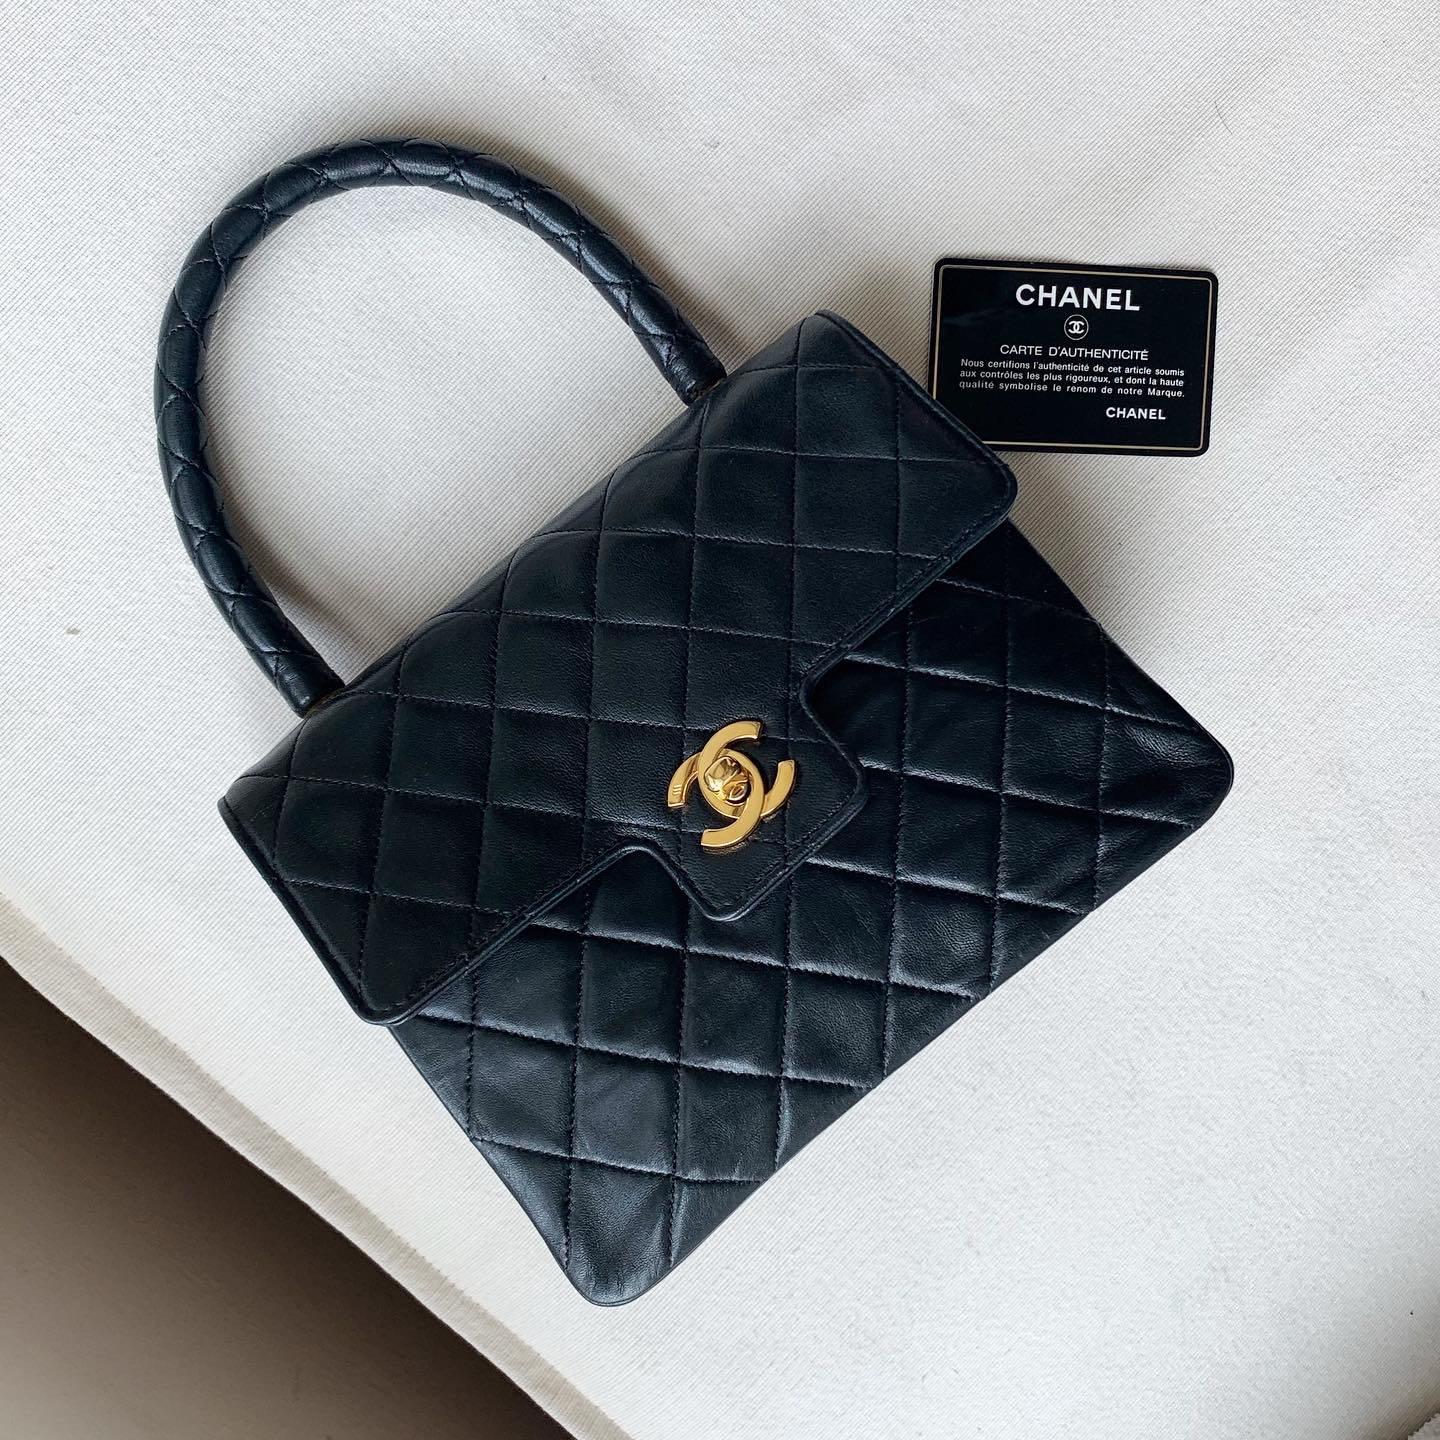 Preloved Authentic Chanel Vintage Black Caviar Classic Kelly Bag